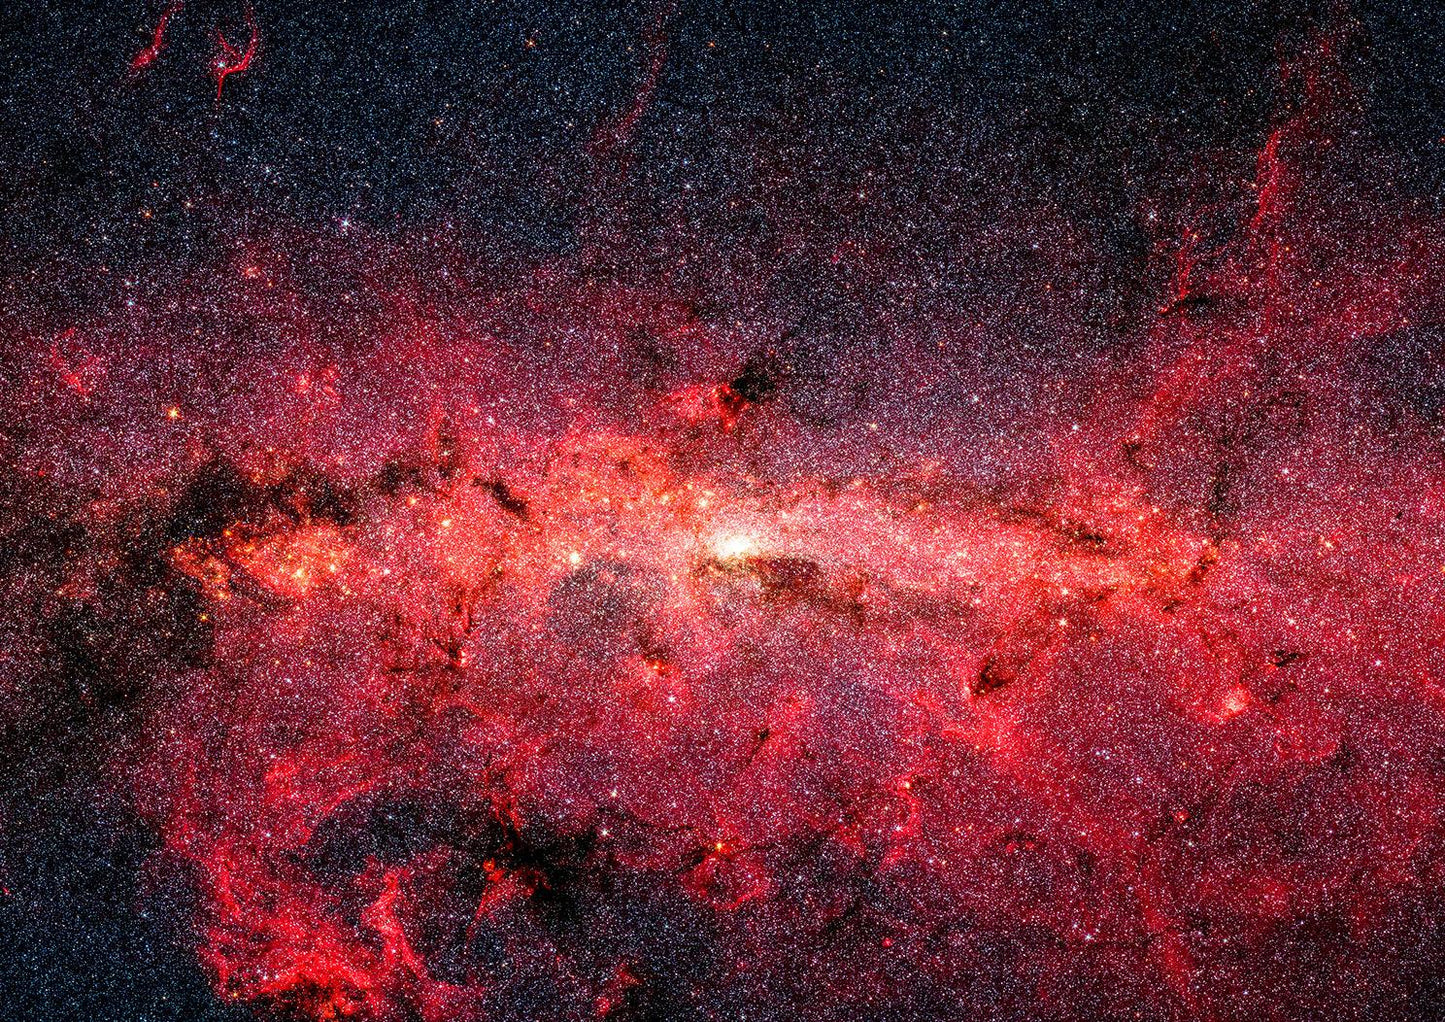 MILKY WAY POSTER: Red Galaxy of Stars Image by NASA - Pimlico Prints